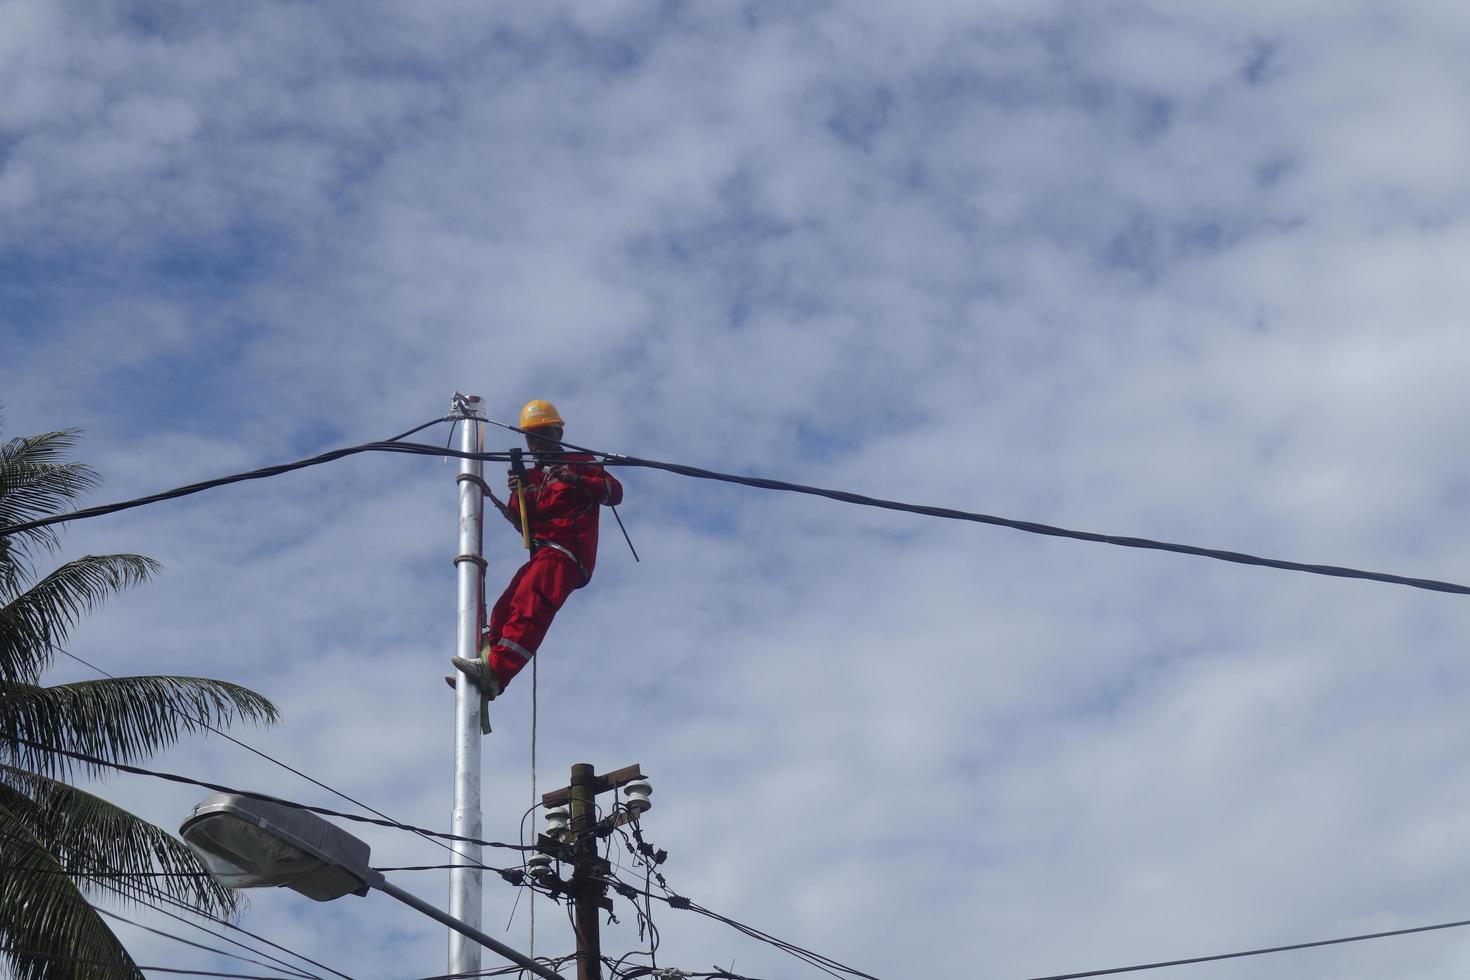 Gorontalo-Indonesia, December 2022 - Technicians connect cables to electric poles. Employee hanging by belt on electricity pole for laying low voltage cable photo